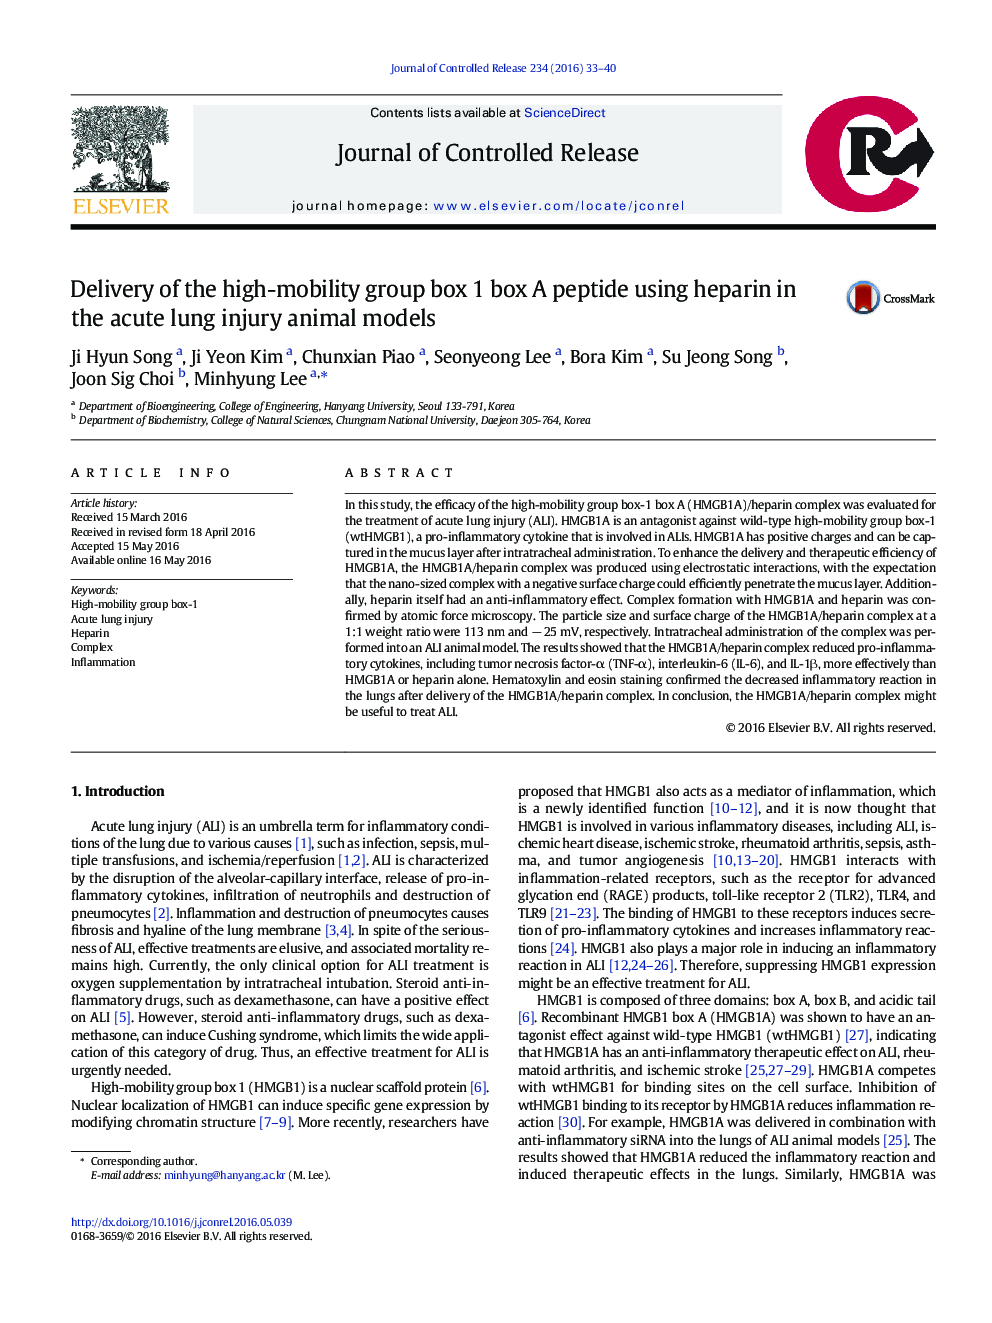 Delivery of the high-mobility group box 1 box A peptide using heparin in the acute lung injury animal models